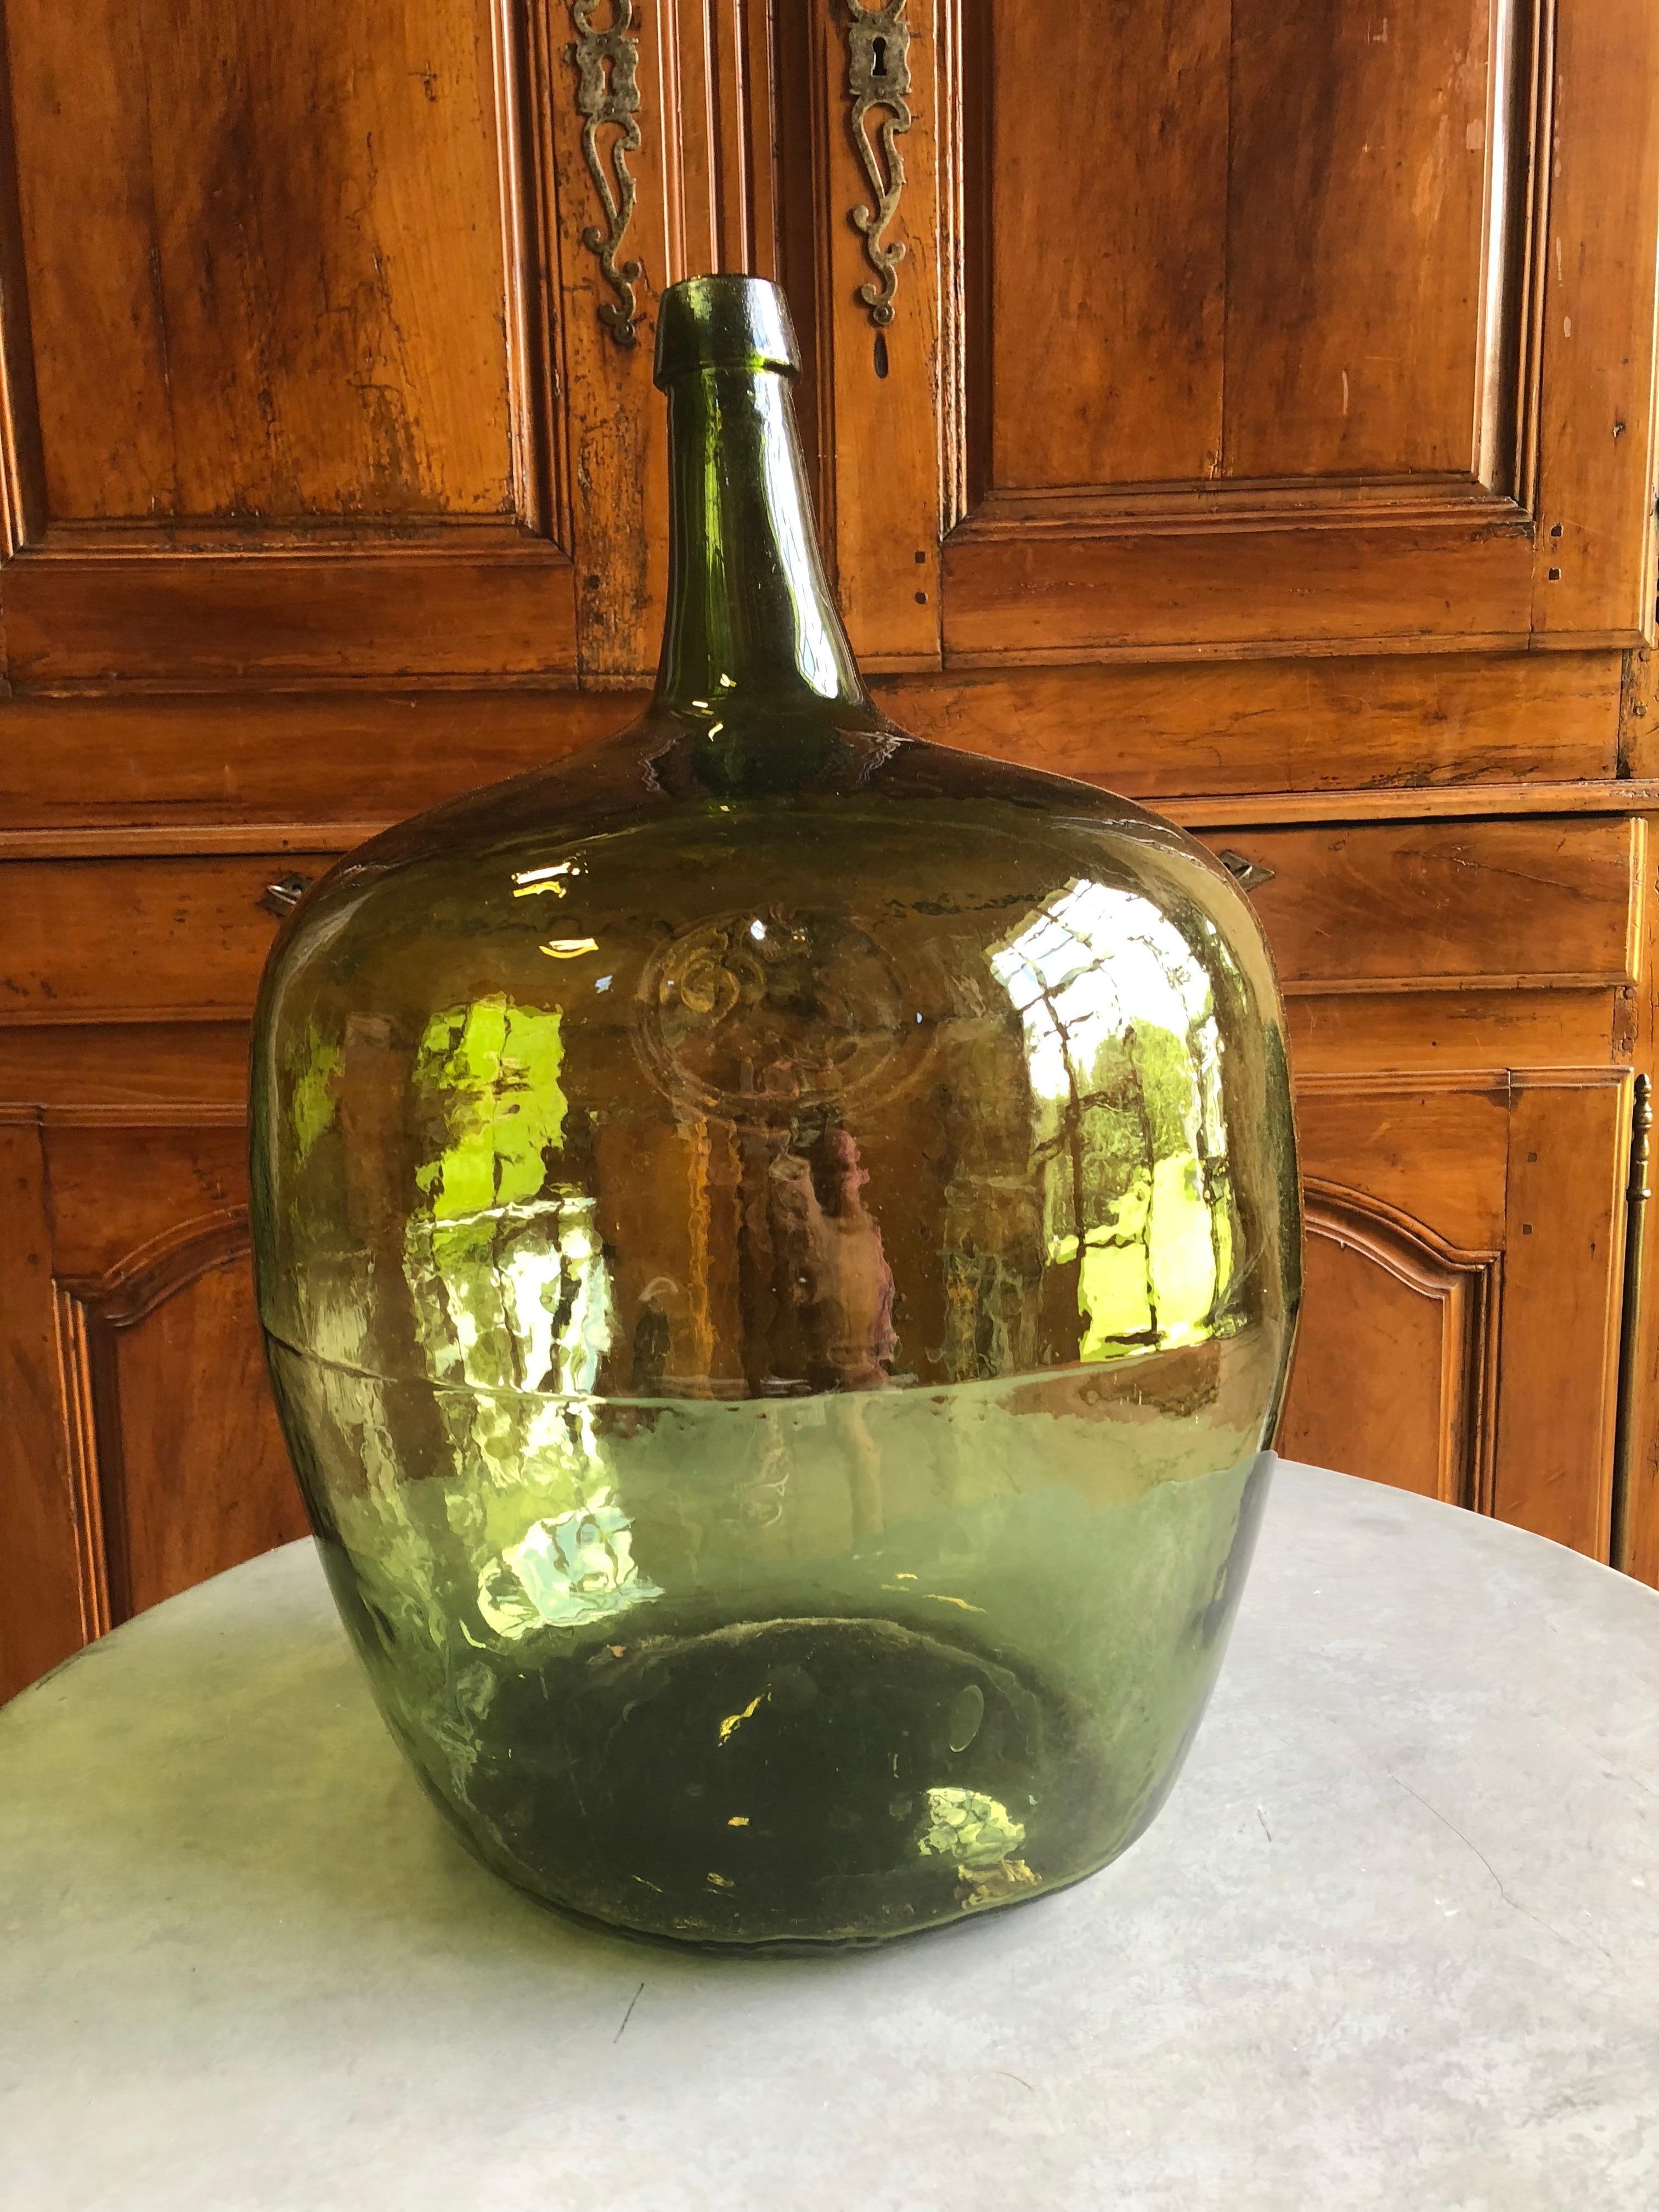 French Provincial Large Early 19th Century Demijohn Bottle